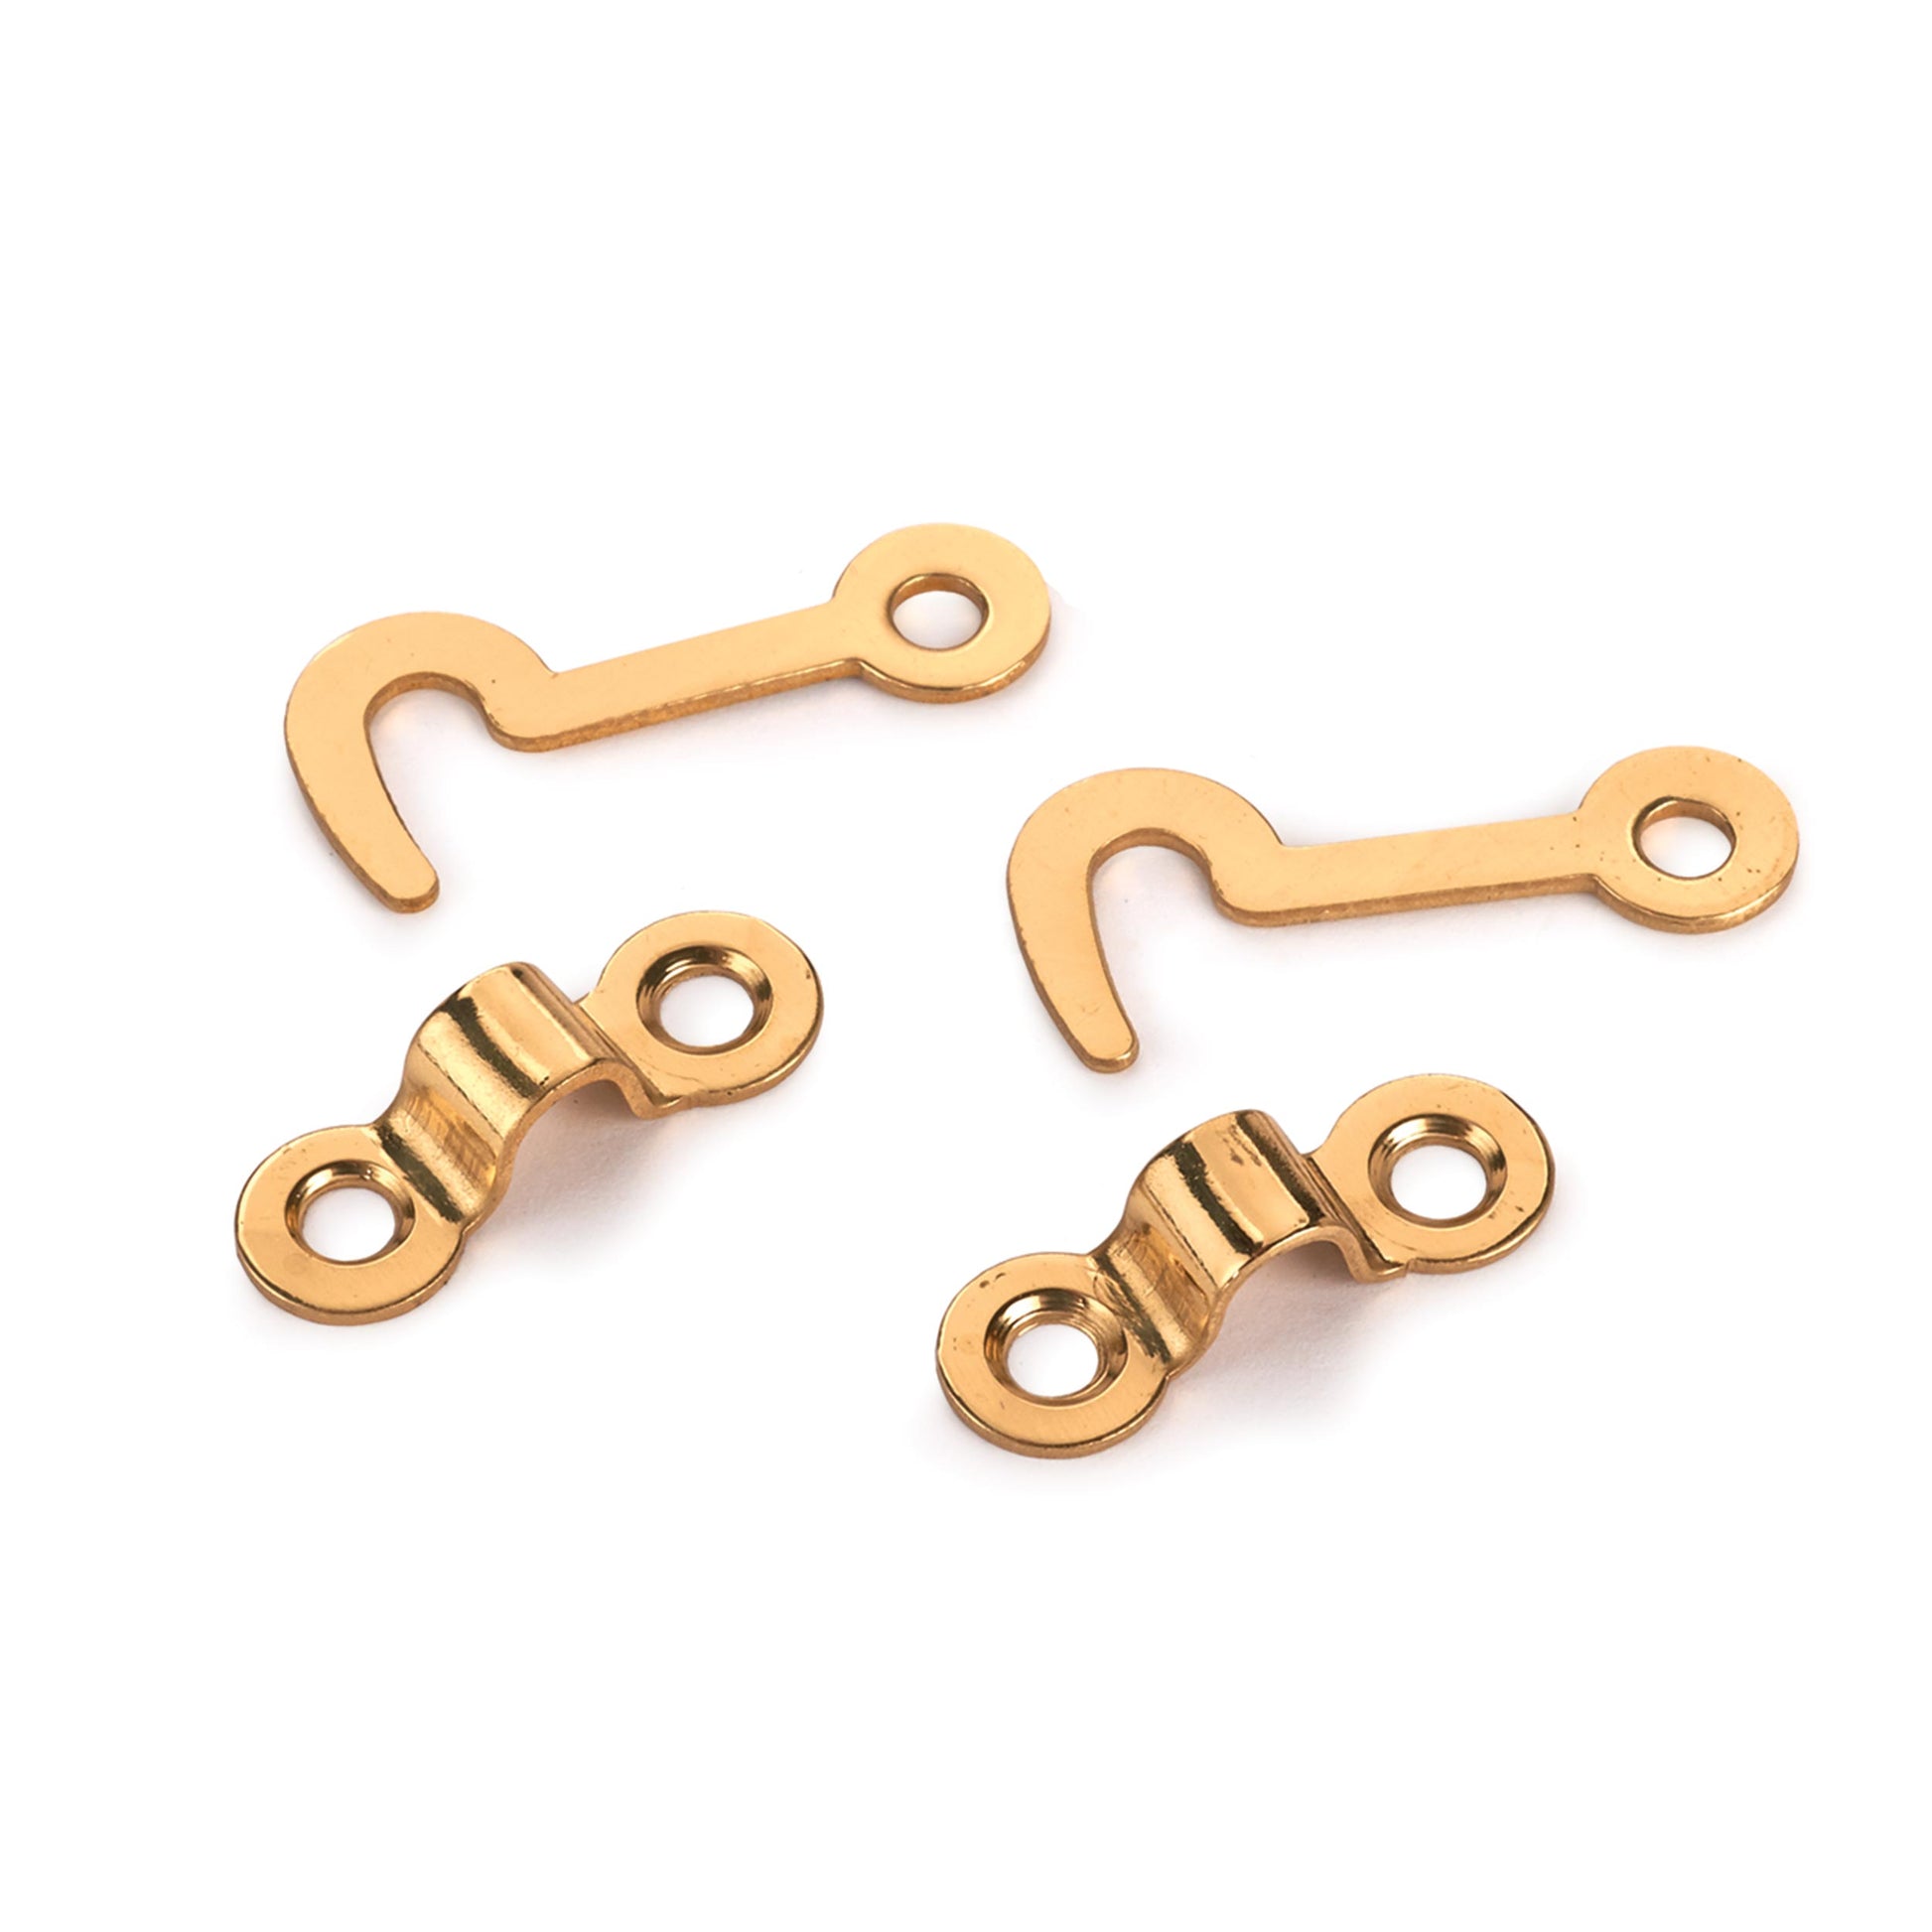 National Solid Brass Miniature Hook and Staples Latch Hinge with